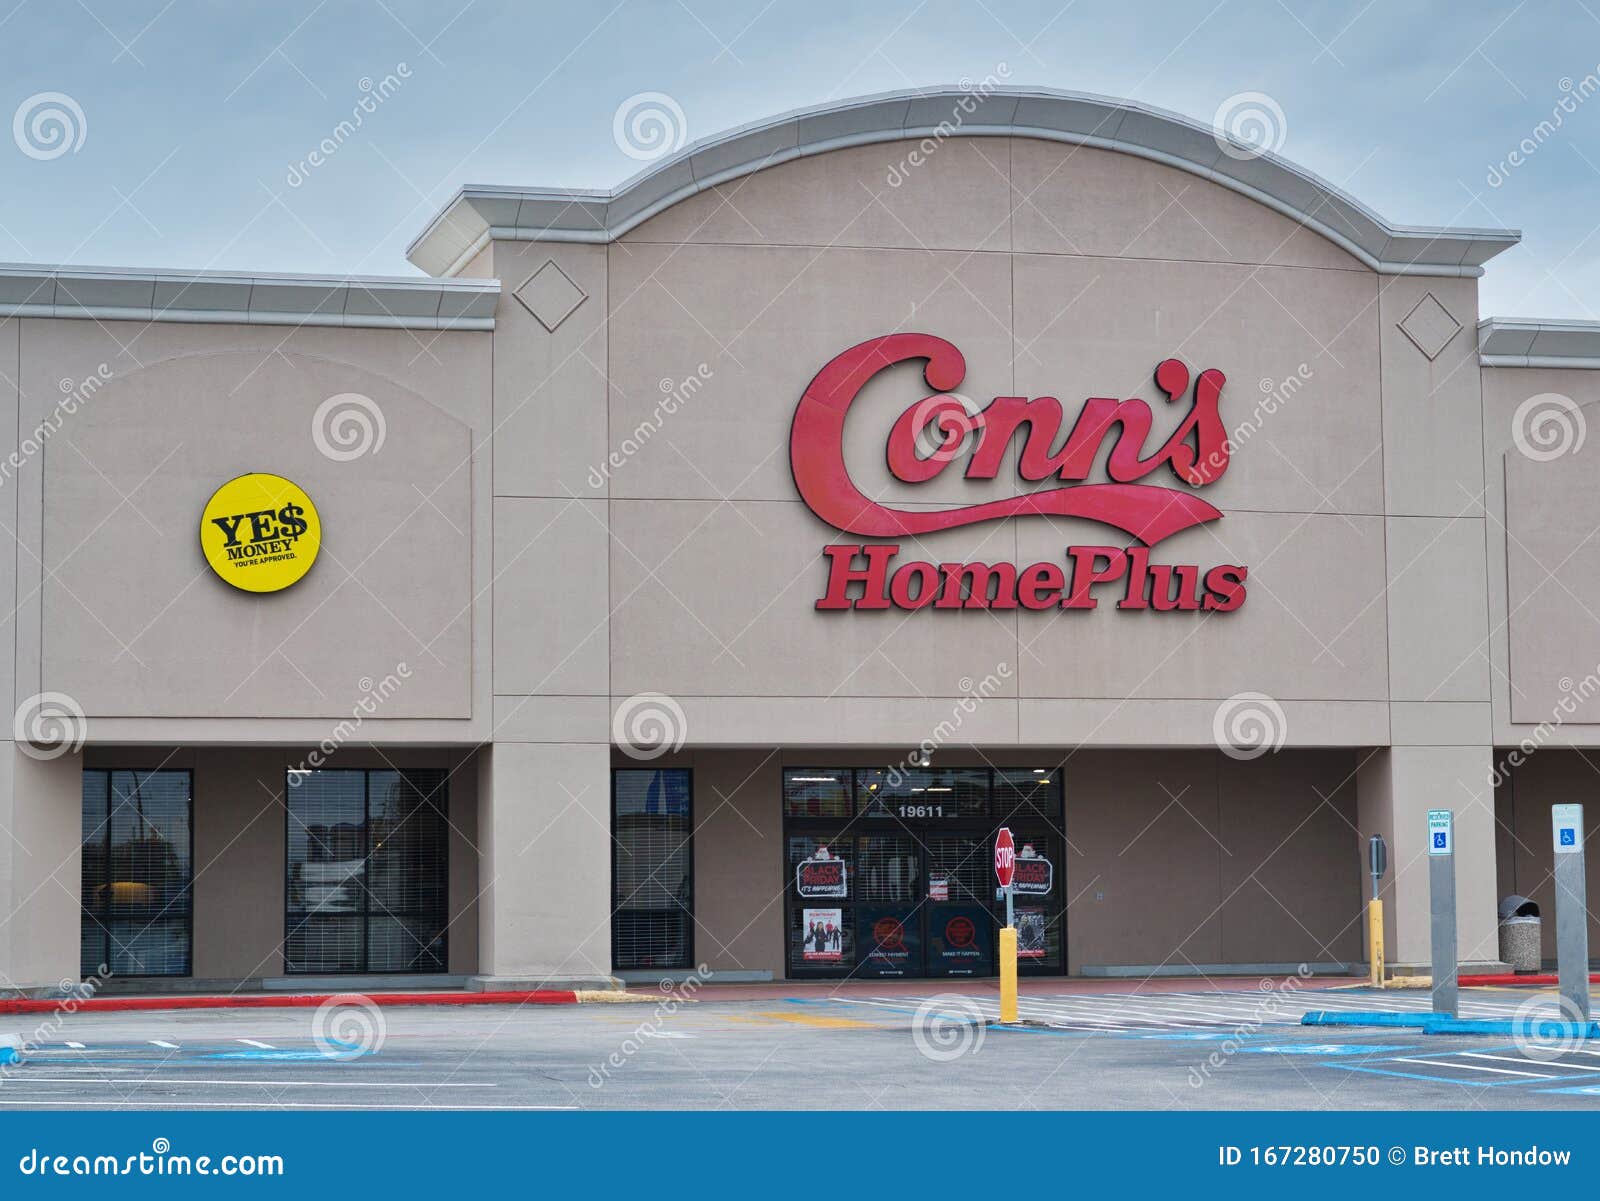 Conn S Home Plus Store In Humble Texas Editorial Image Image